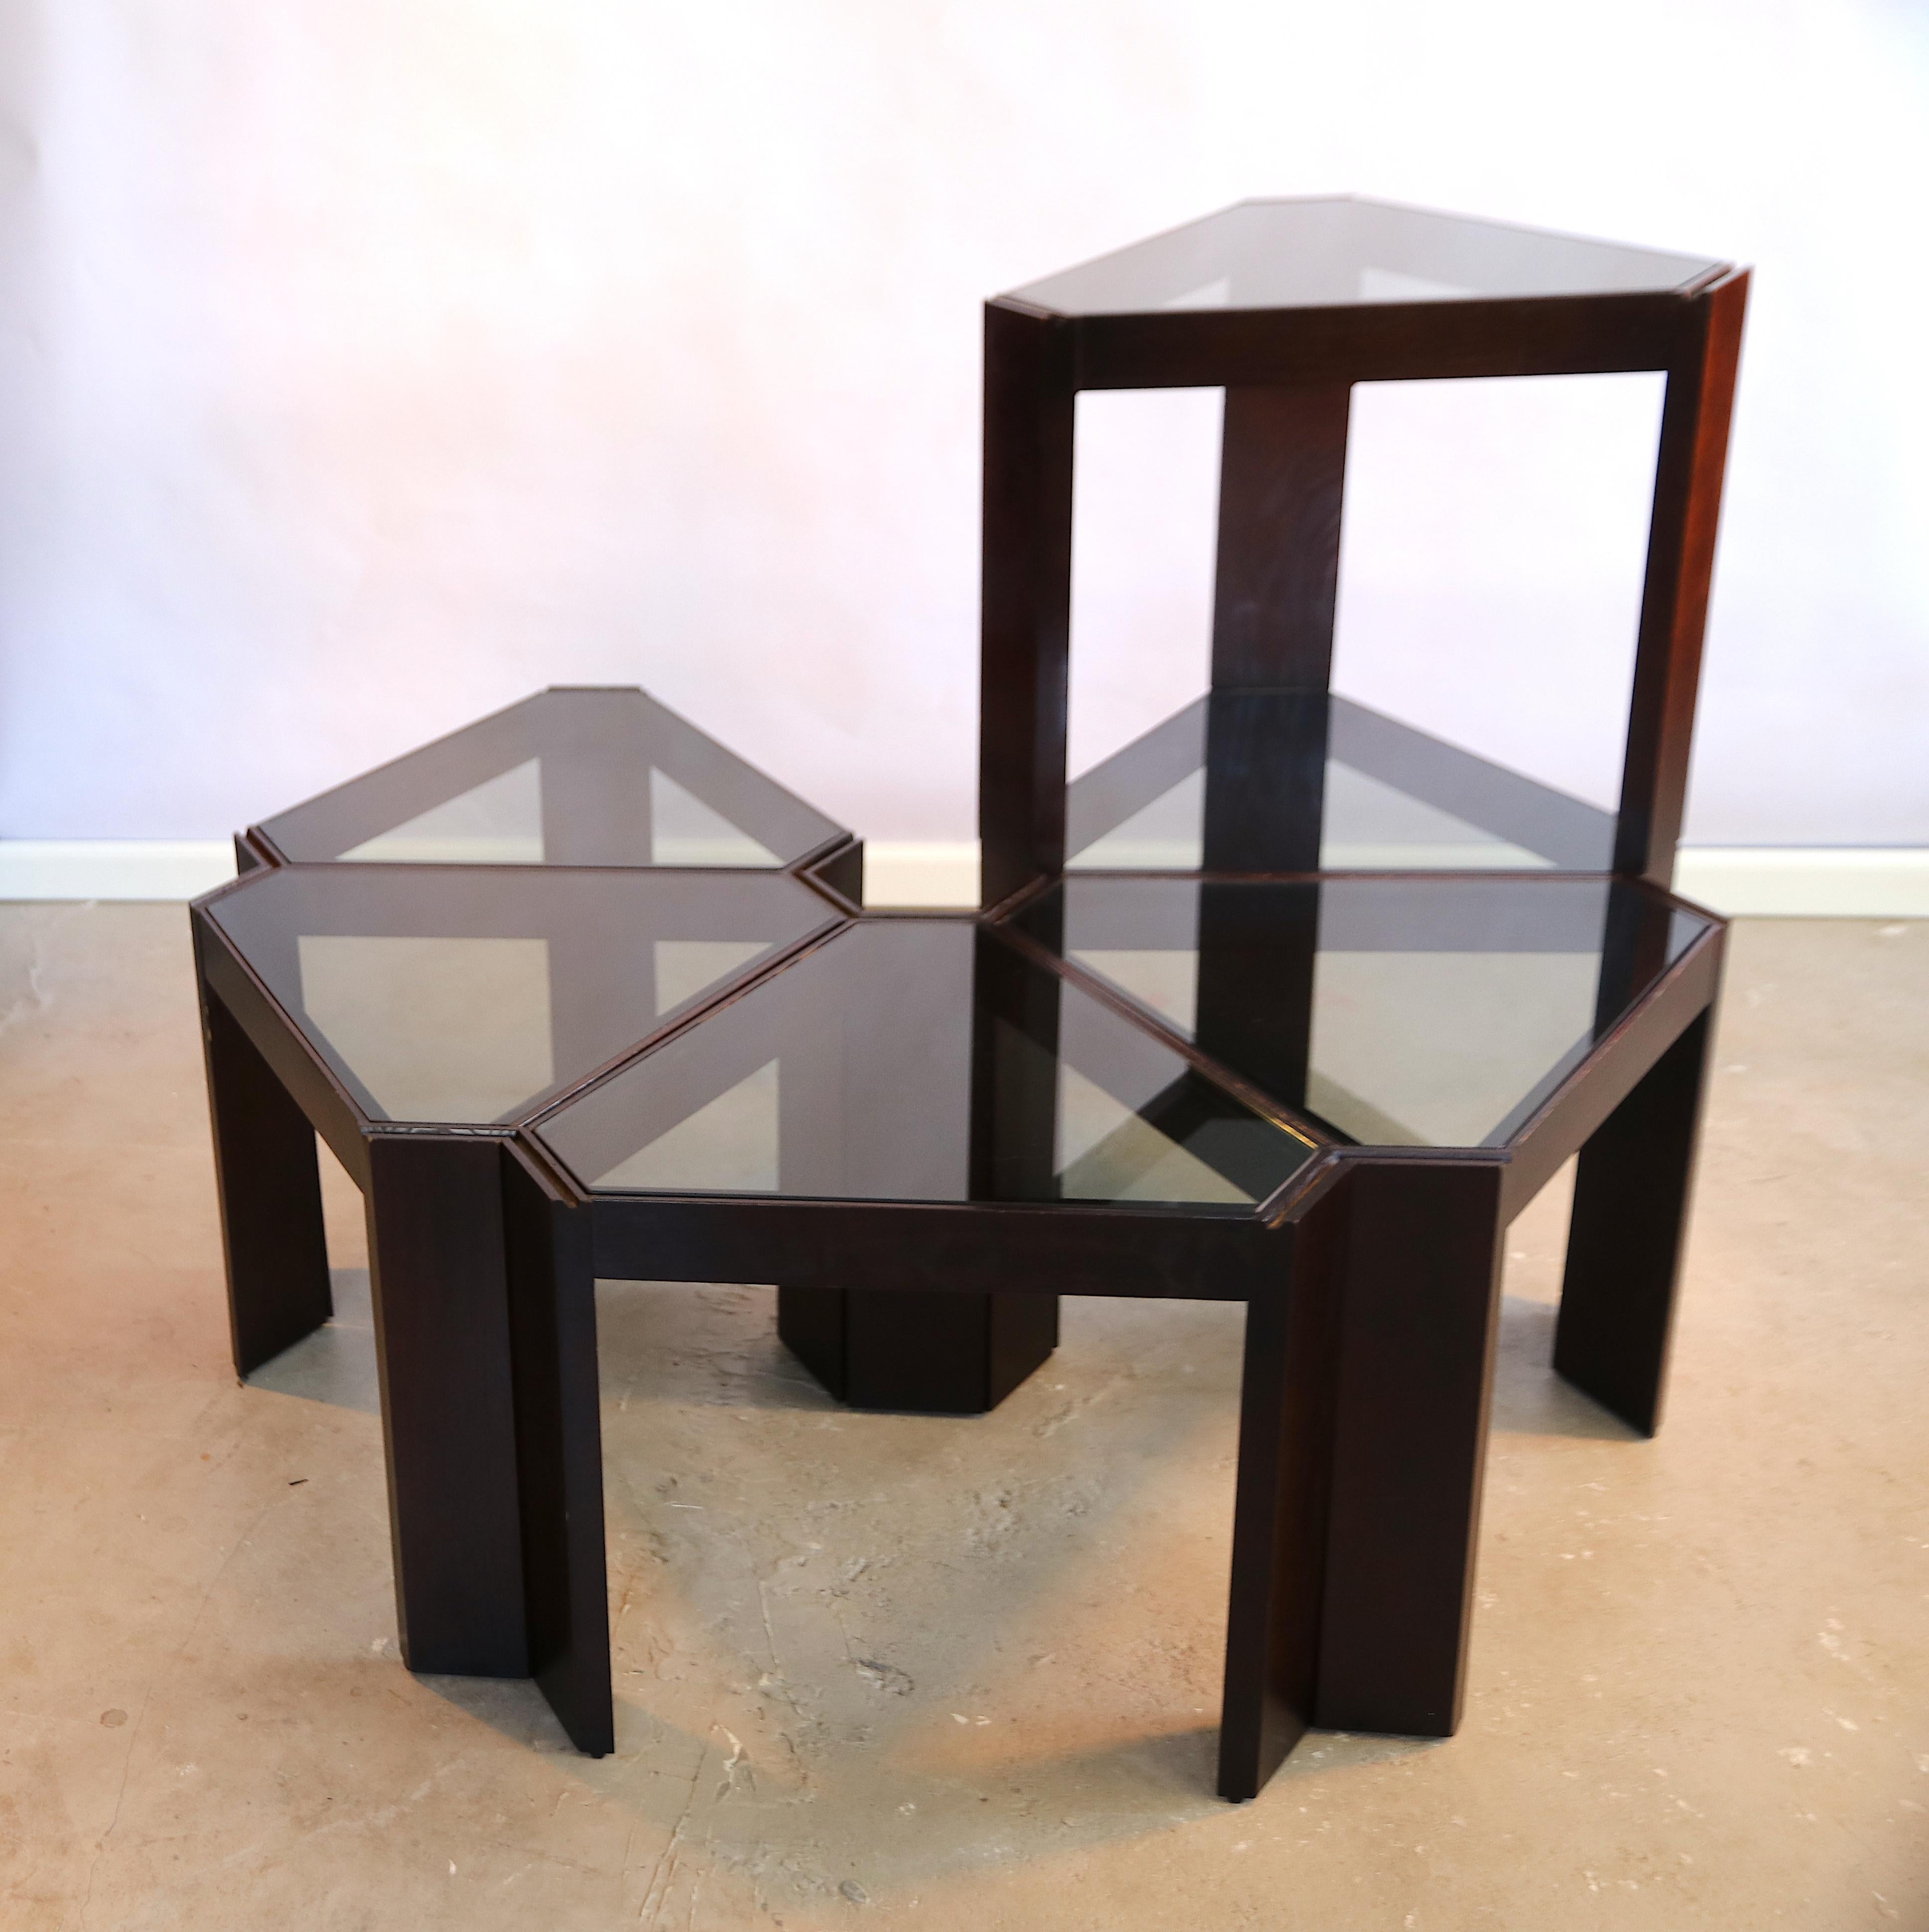 Porada Arredi Stackable Modular Tinted Glass Side Coffee Tables, Set of 6 In Good Condition For Sale In Amsterdam, NL